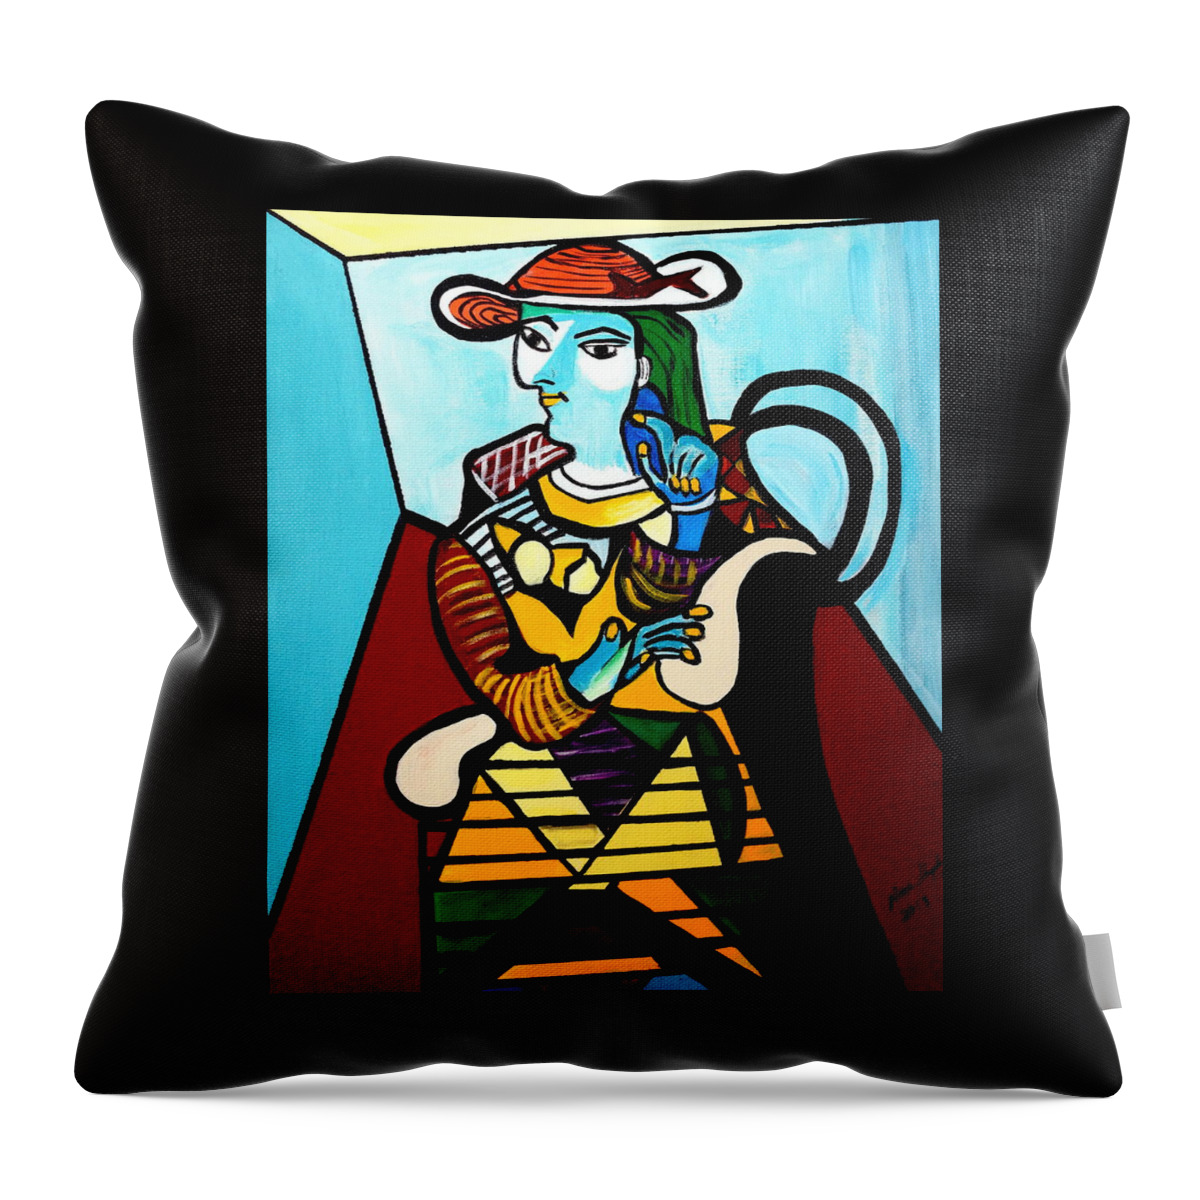 Picasso By Nora Throw Pillow featuring the painting Man In Chair Picasso by Nora Shepley